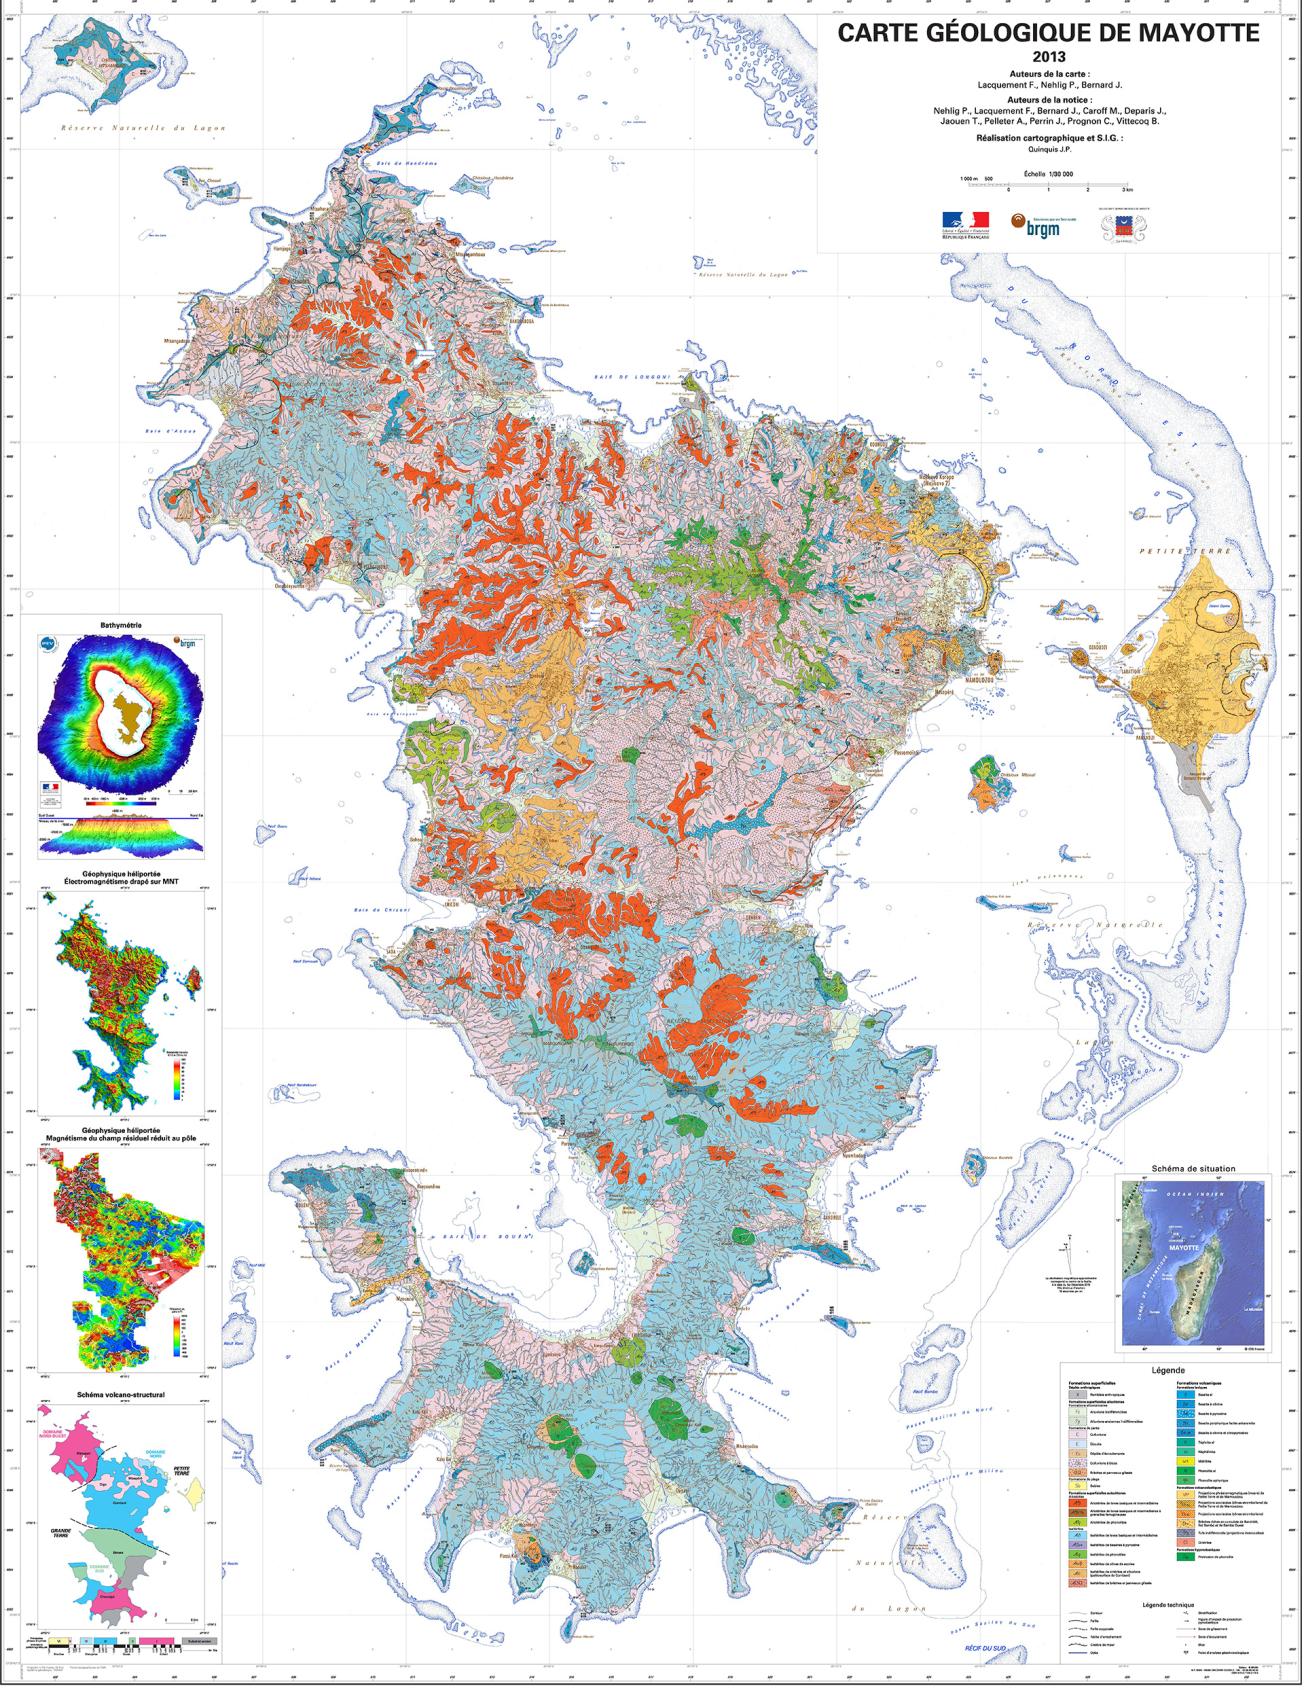 Geological map of Mayotte